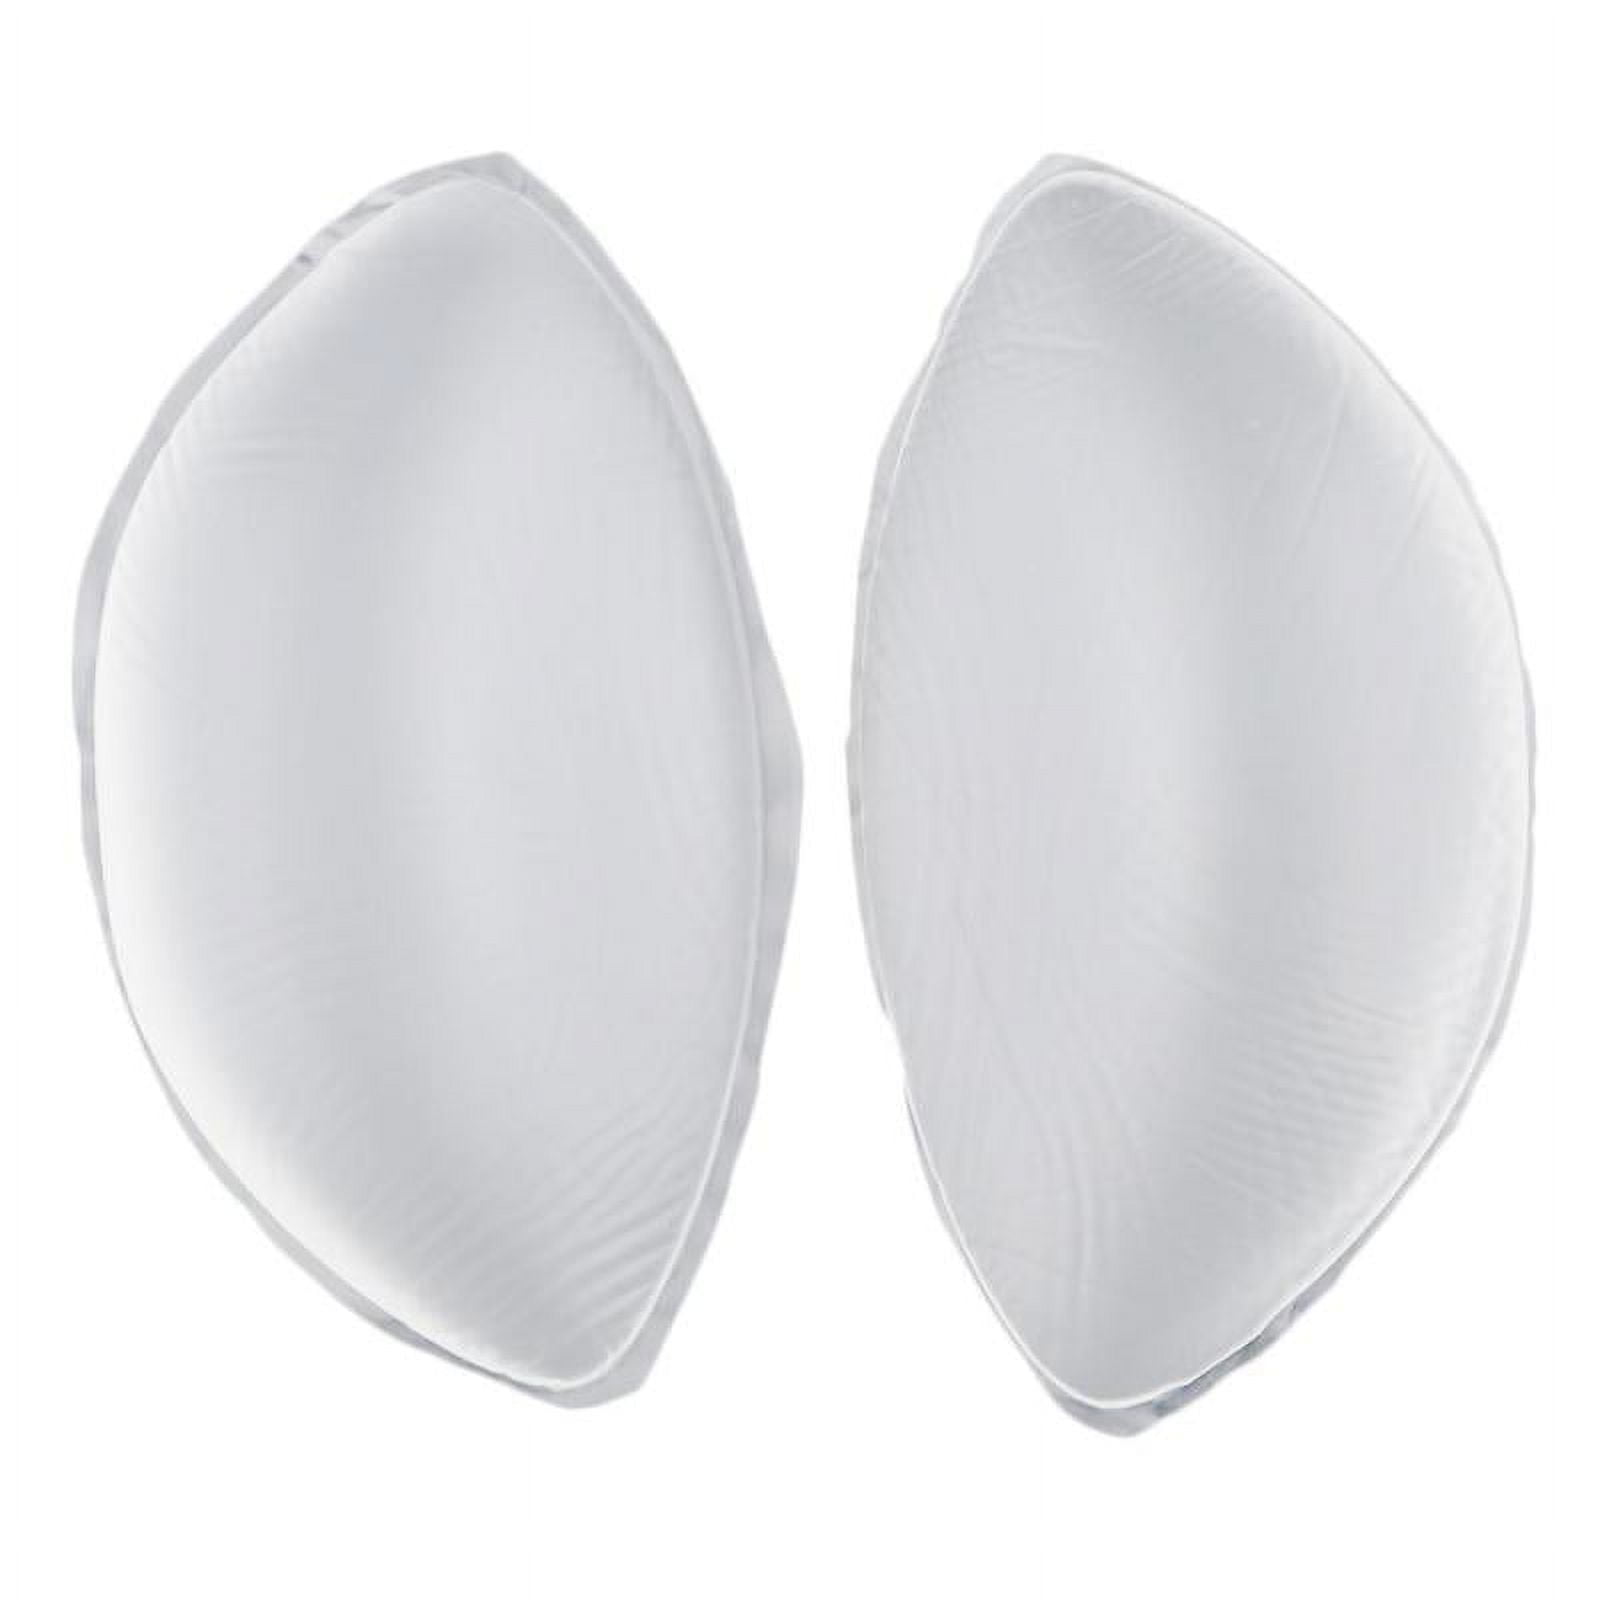 Women's Thick Silicone Bra Pads Inserts Breast Enhancers Cleavage Enhancing  - Clear, as described